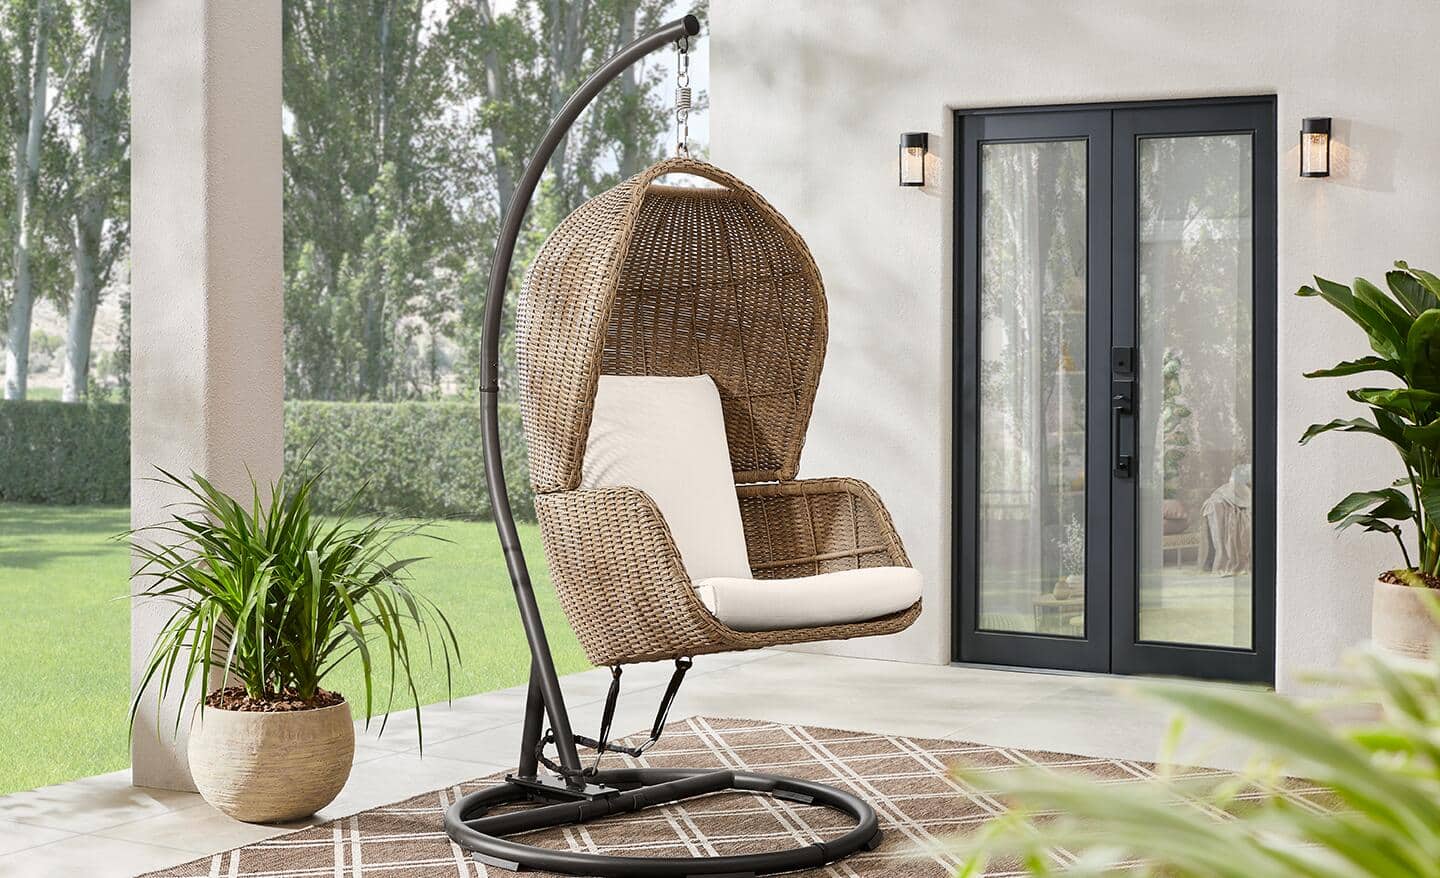 An egg-shaped wicker swing with off-white cushions on a patio.